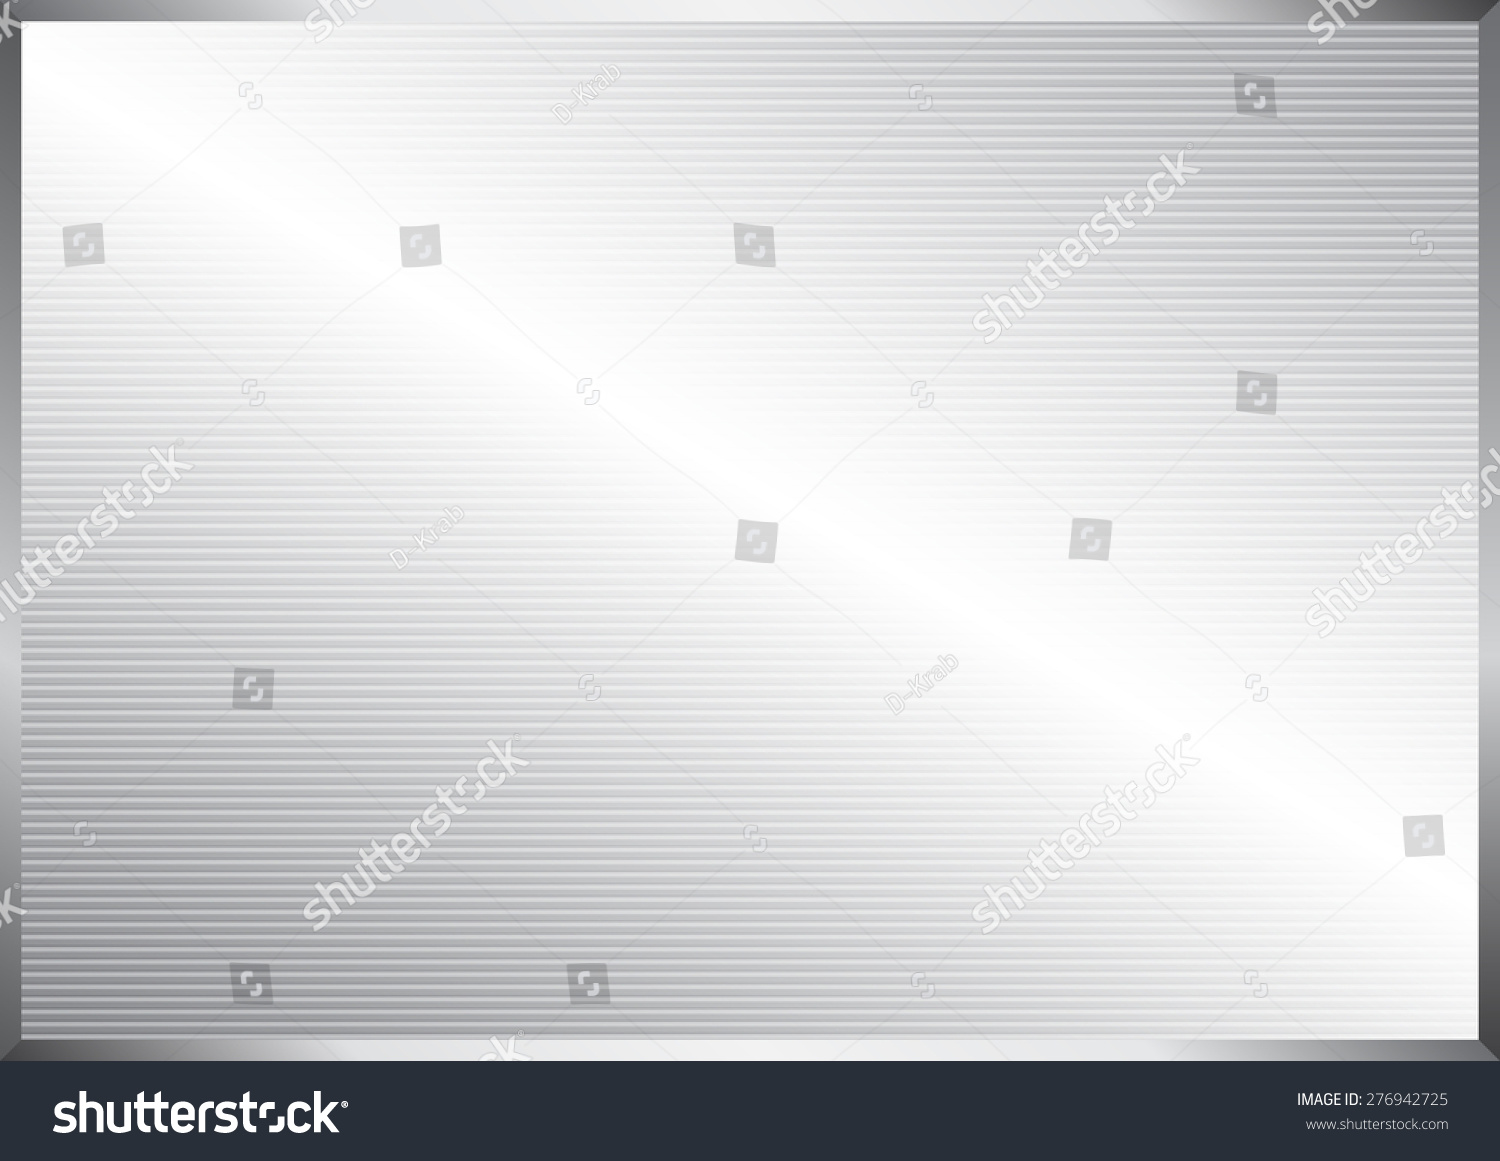 Horizontal line pattern on silver abstract background, vector illustration #276942725